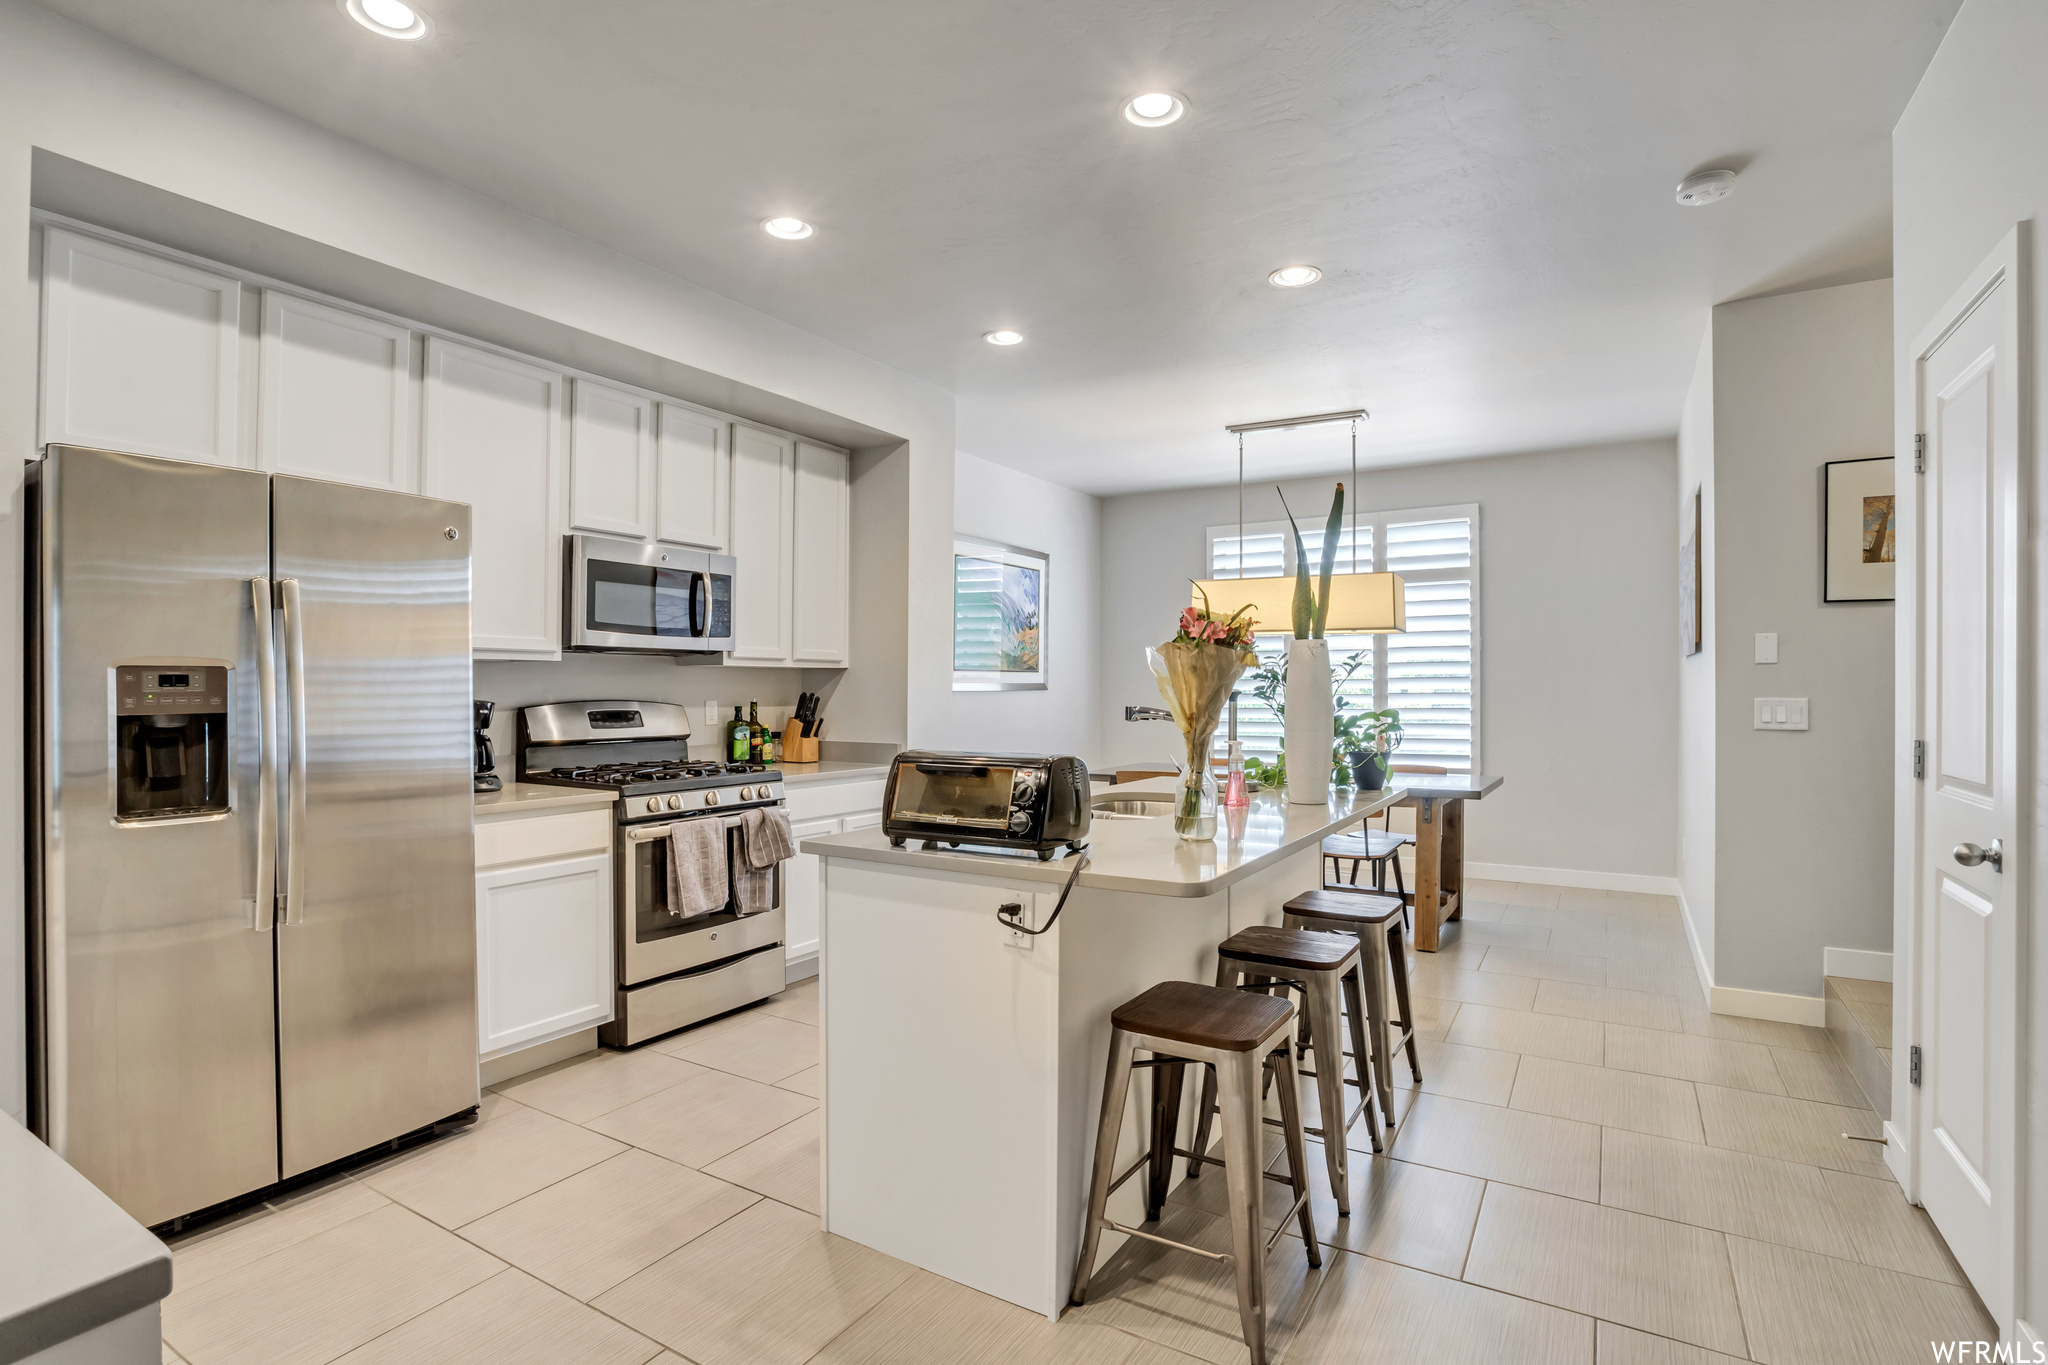 Kitchen with hanging light fixtures, appliances with stainless steel finishes, a breakfast bar area, white cabinets, and a center island with sink